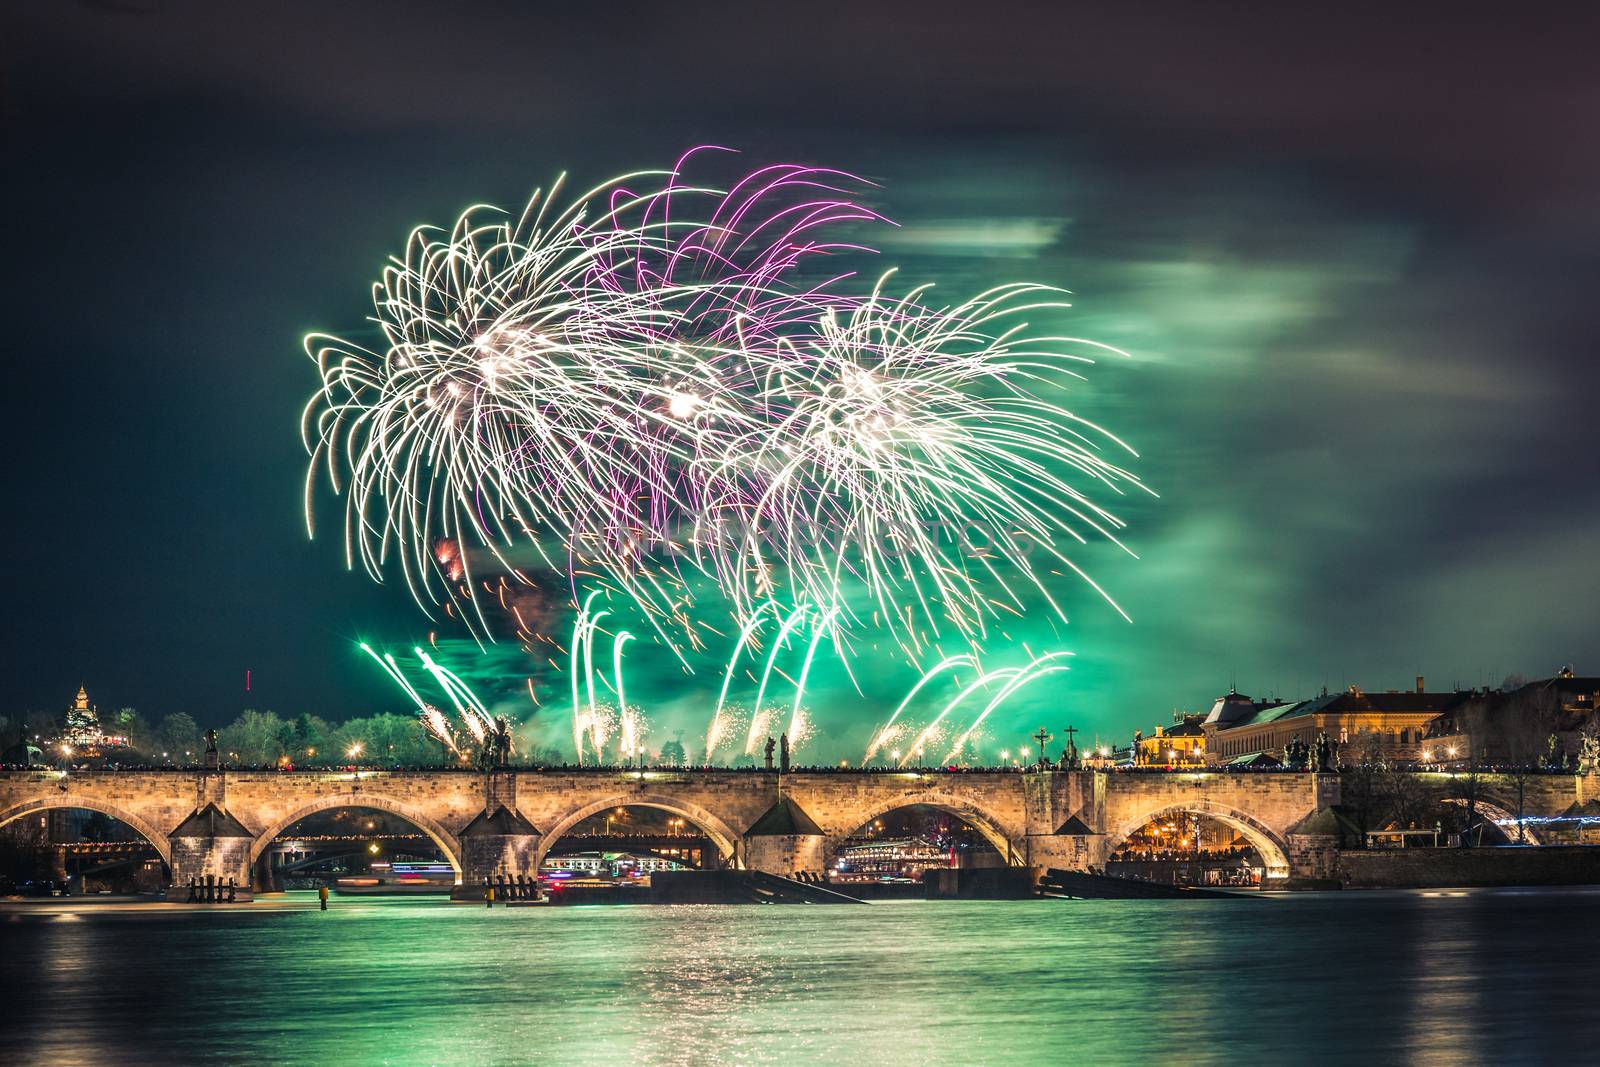 A fireworks show near the historical Charles Bridge in the centre of Prague by petrsvoboda91